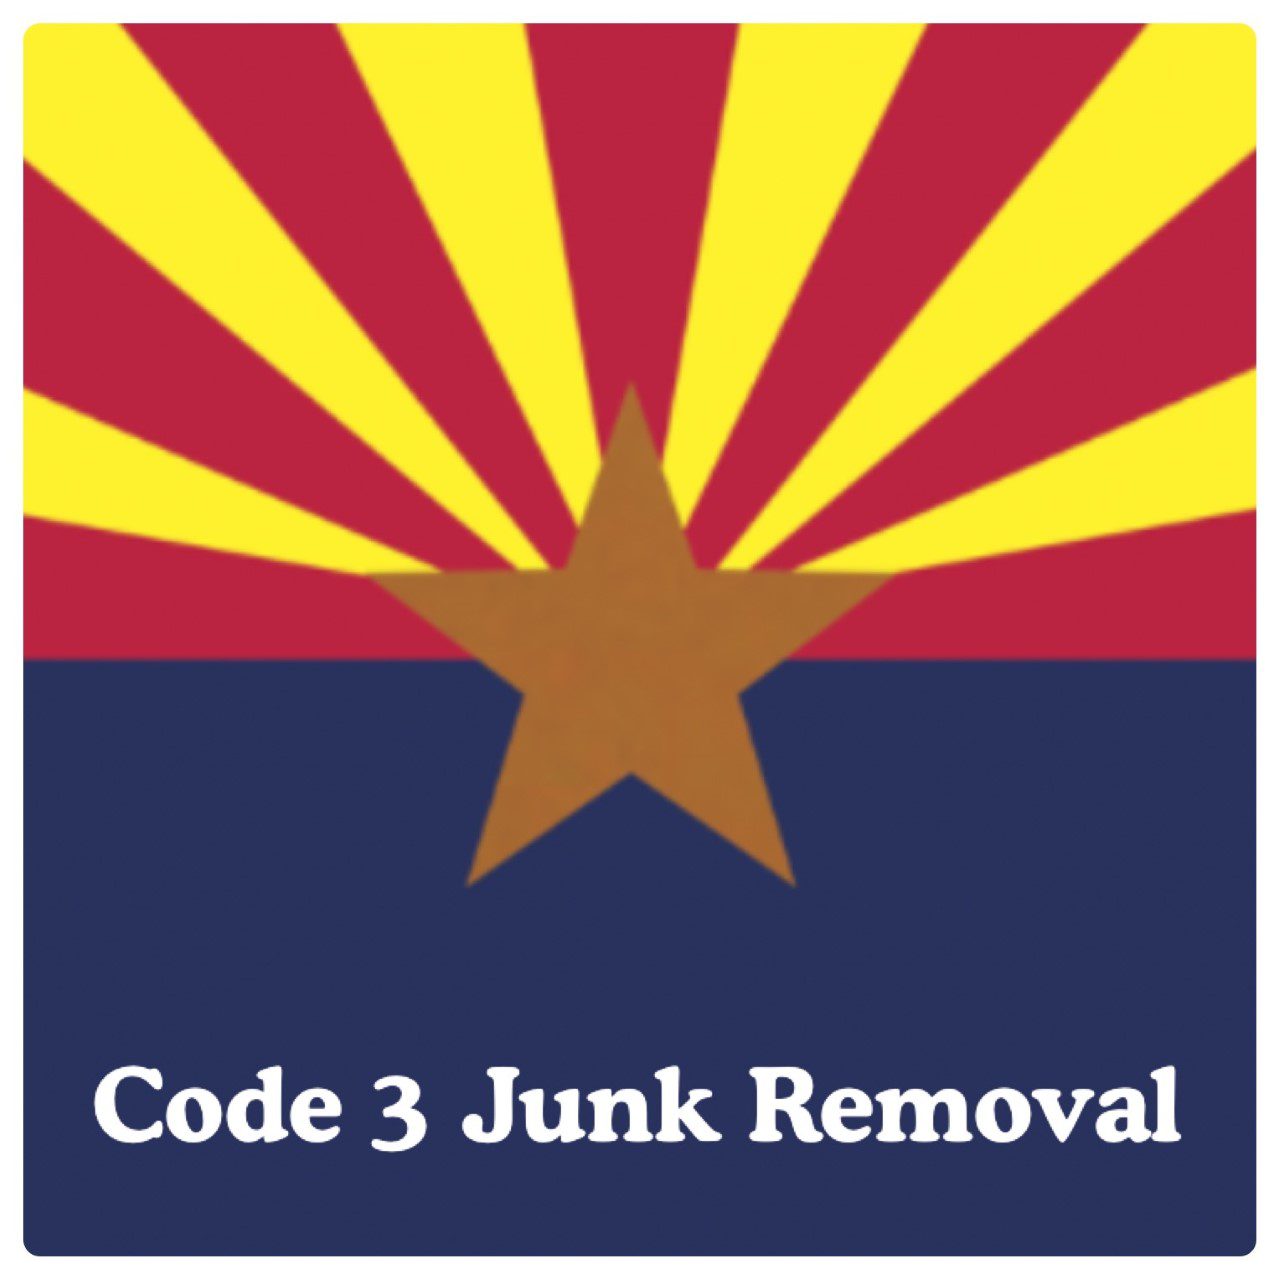 Junk Removal, Junk Hauling and Junk Pickup in San Tan Valley